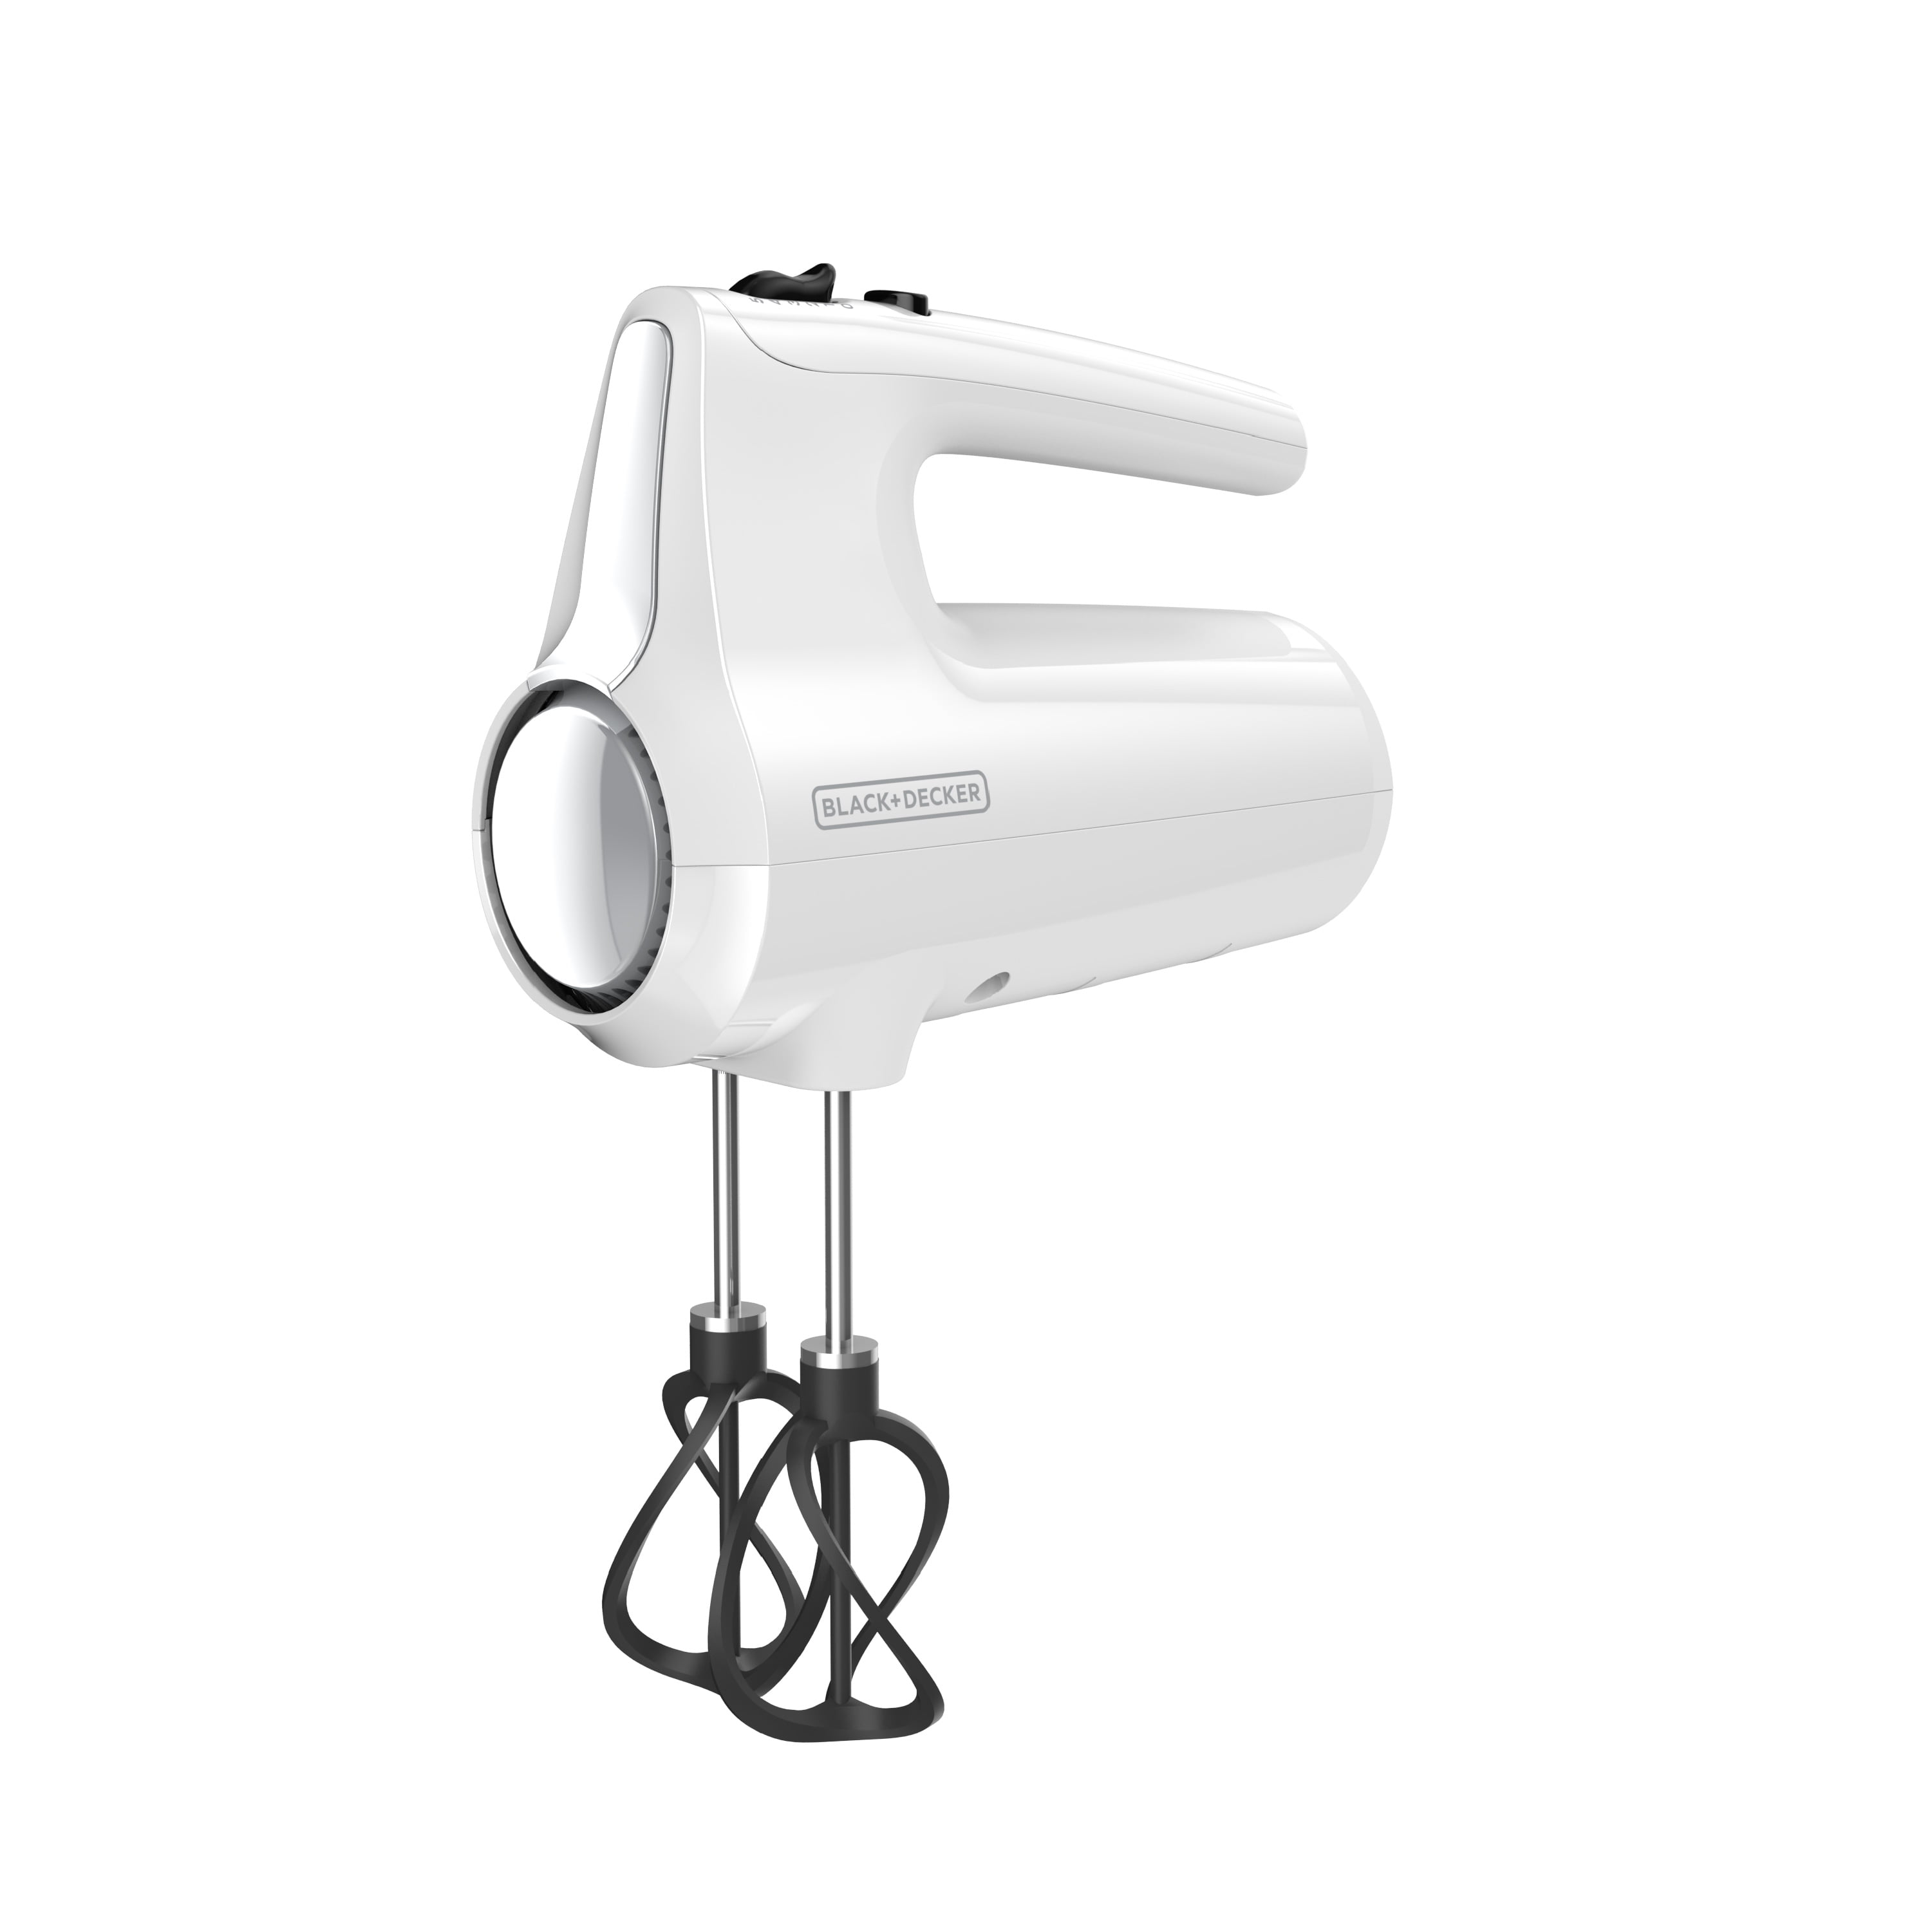 Hand Mixer Electric, 450W Power Handheld Mixer with Turbo, Eject